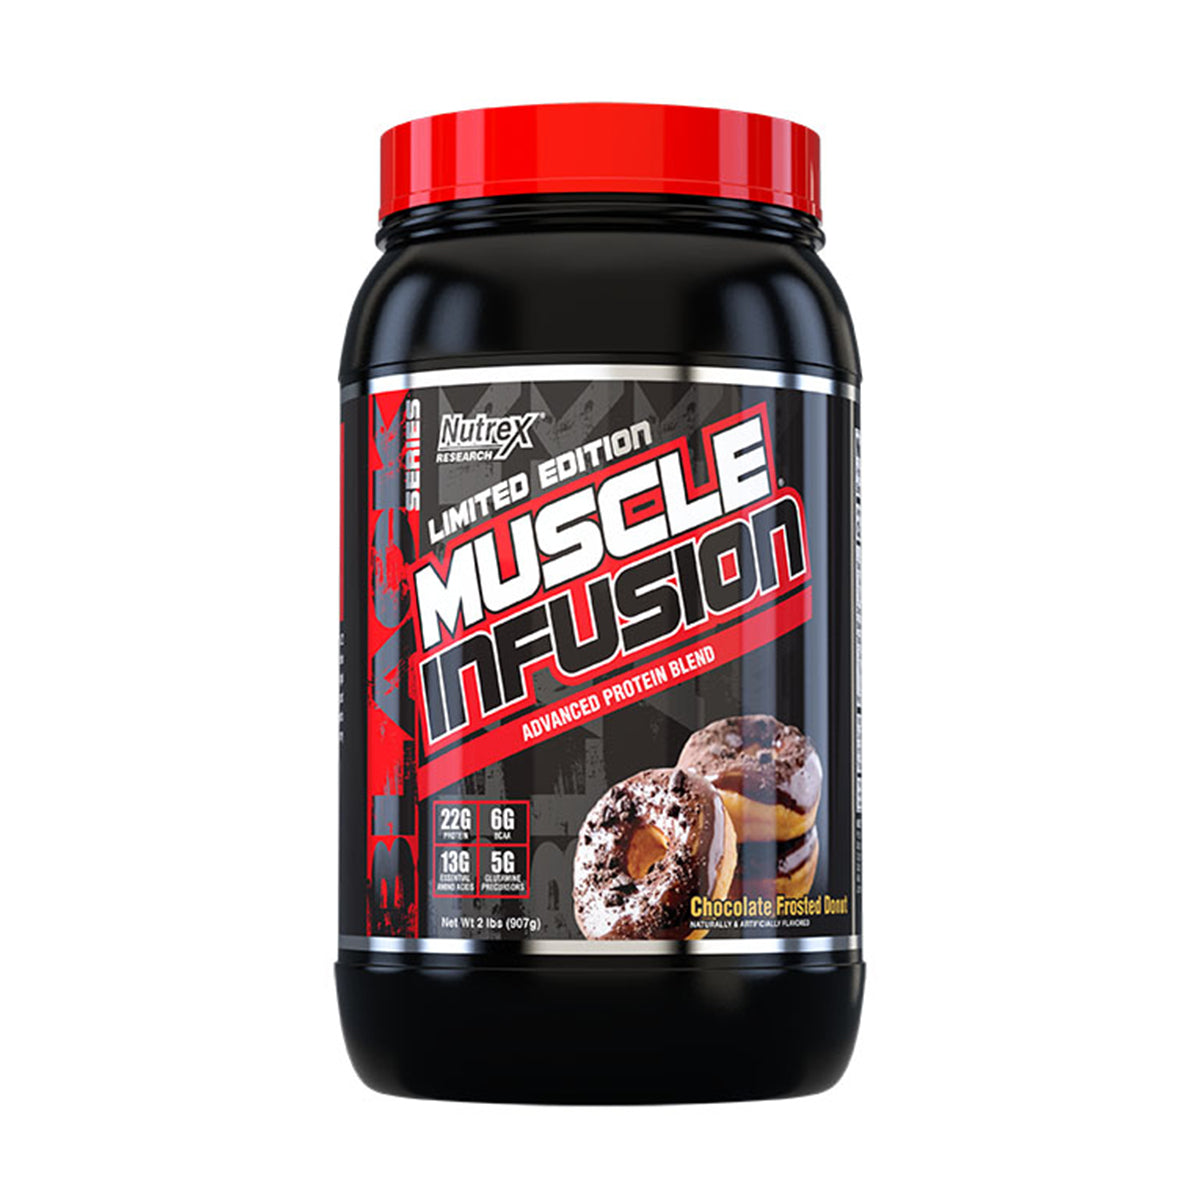 CLEARANCE NUTREX Muscle Infusion Protein blend 2lbs EXP: JUL 2023